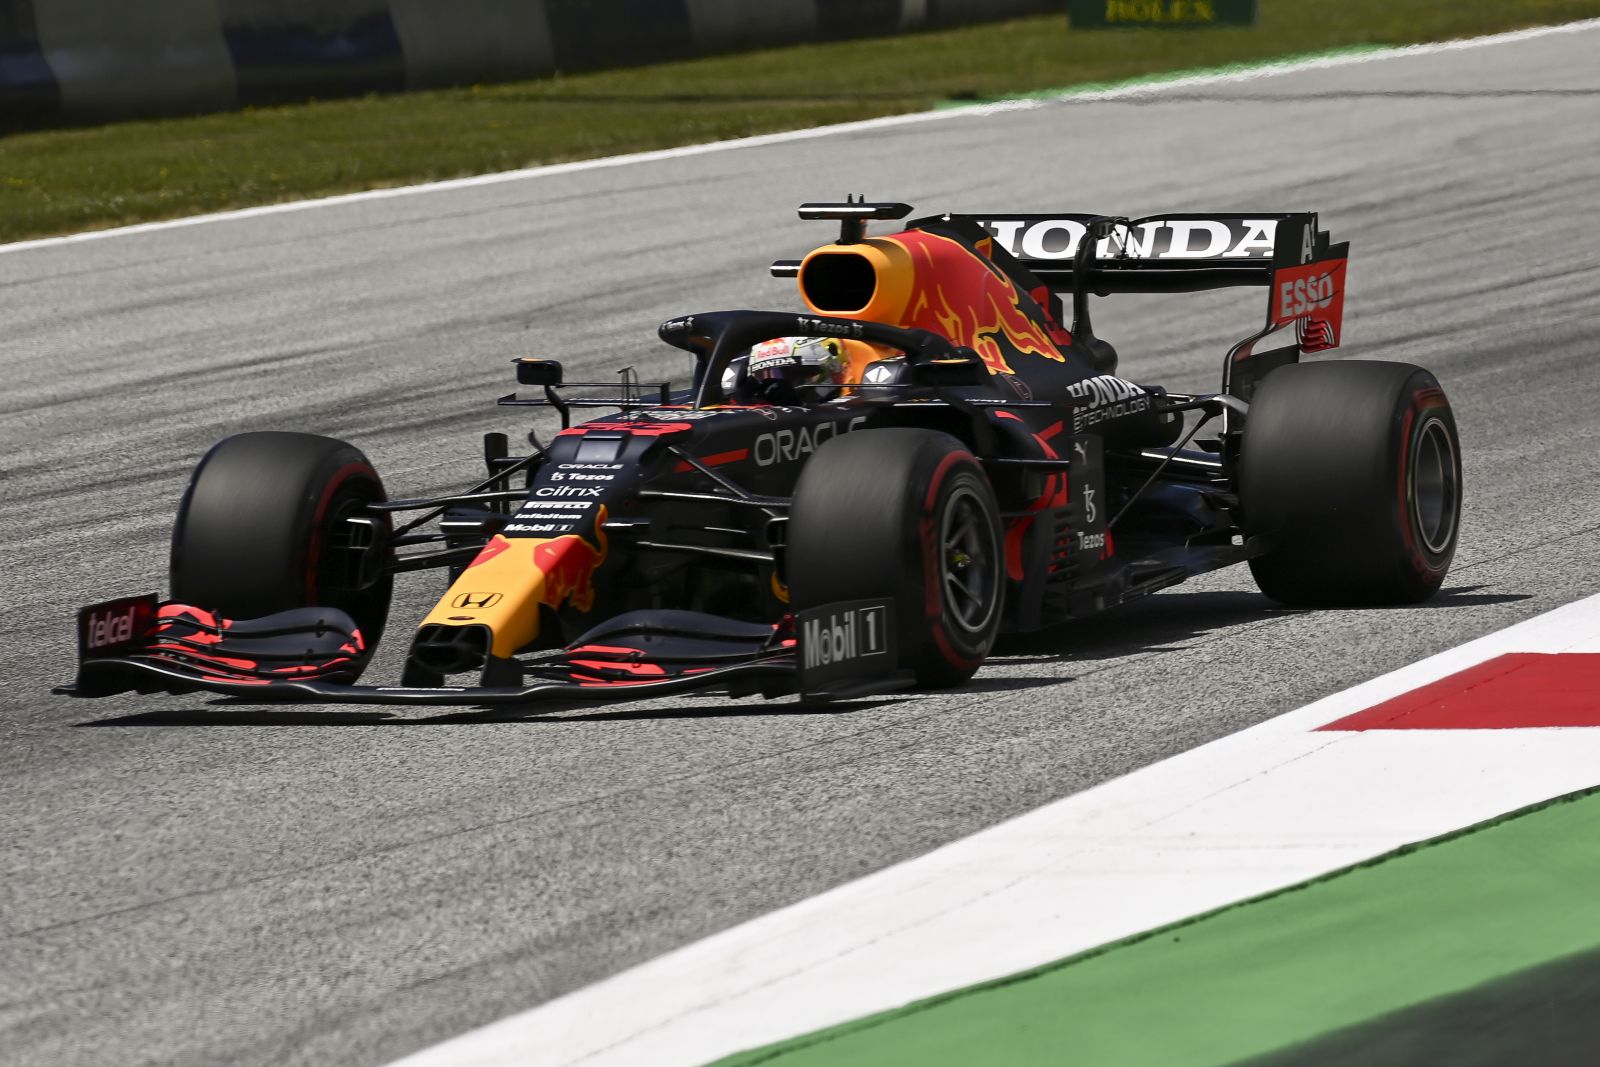 epa09302500 Dutch Formula One driver Max Verstappen of Red Bull Racing in action during the third practice session of the Formula One Grand Prix of Styria at the Red Bull Ring in Spielberg, Austria, 26 June 2021. The 2021 Formula One Grand Prix of Styria will take place on 27 June.  EPA/CHRISTIAN BRUNA